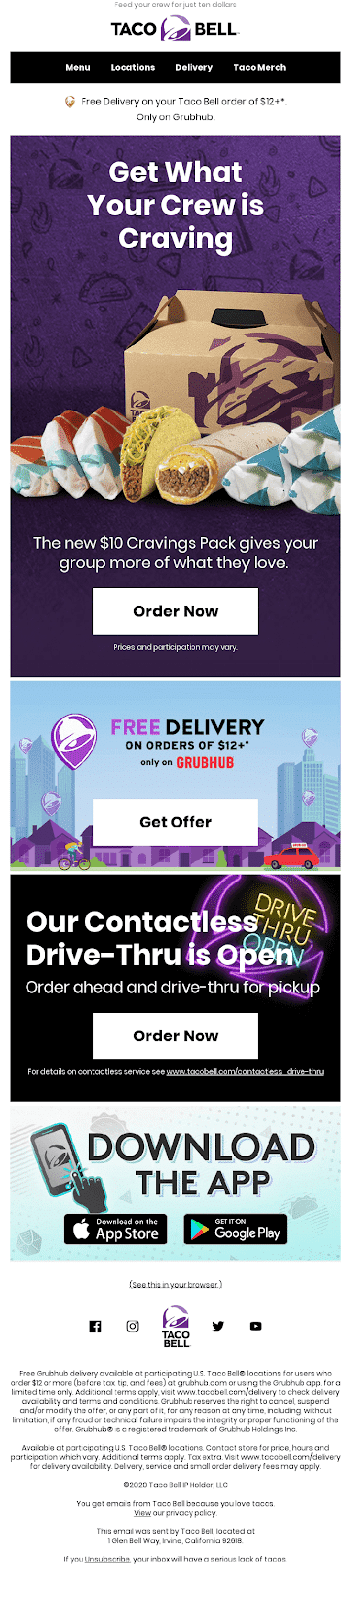 taco bell new product email example